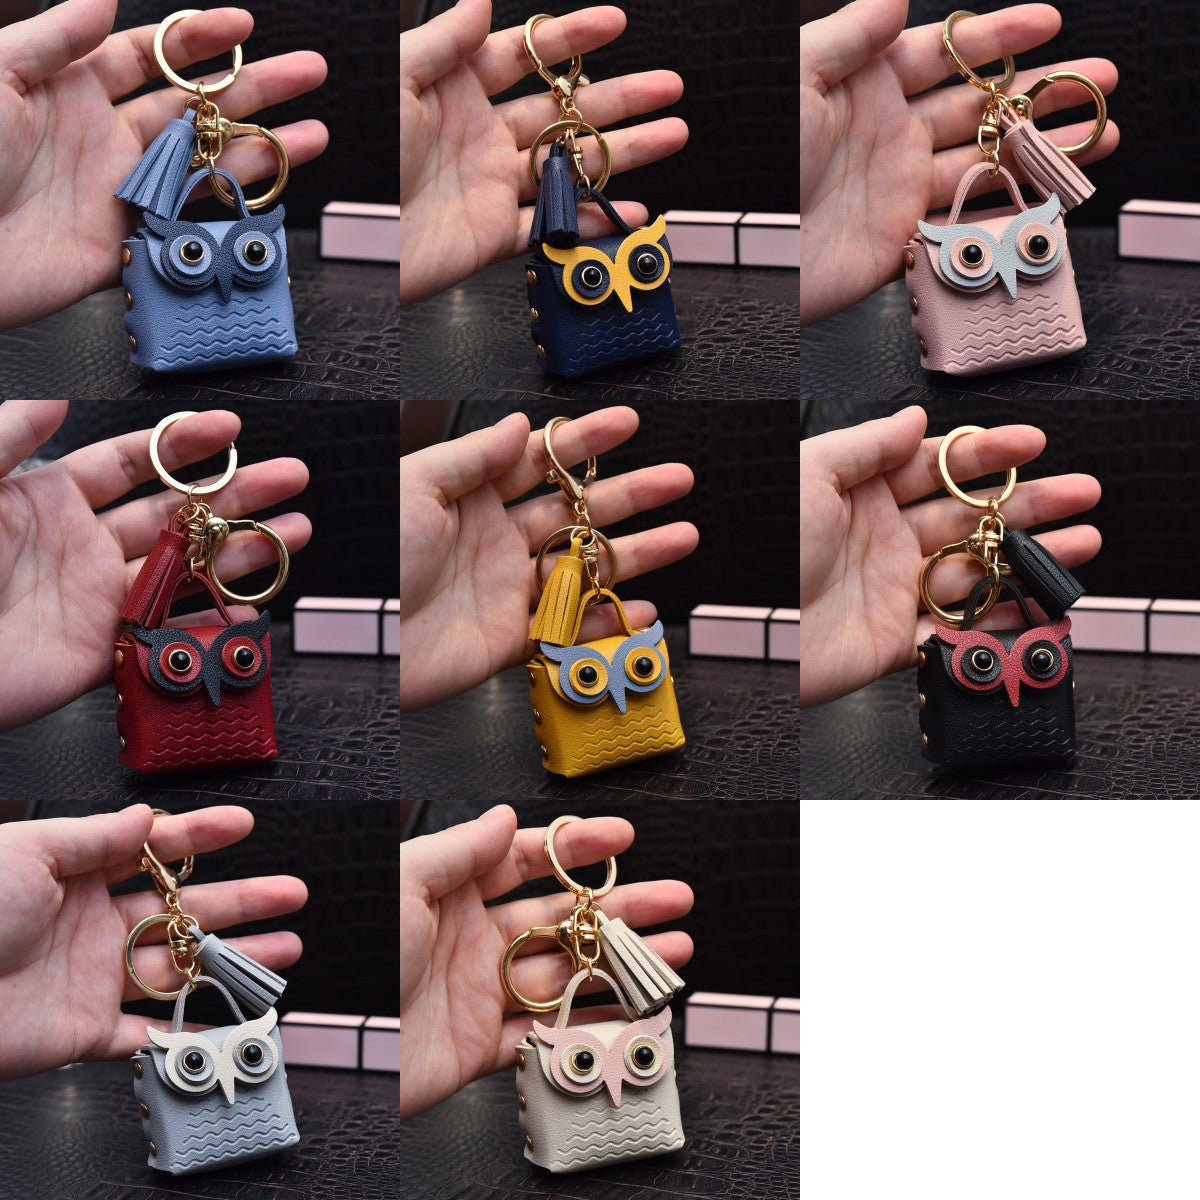 Cute Owl Bag Keychains Fashion Decorations Various Colors Available High Quality